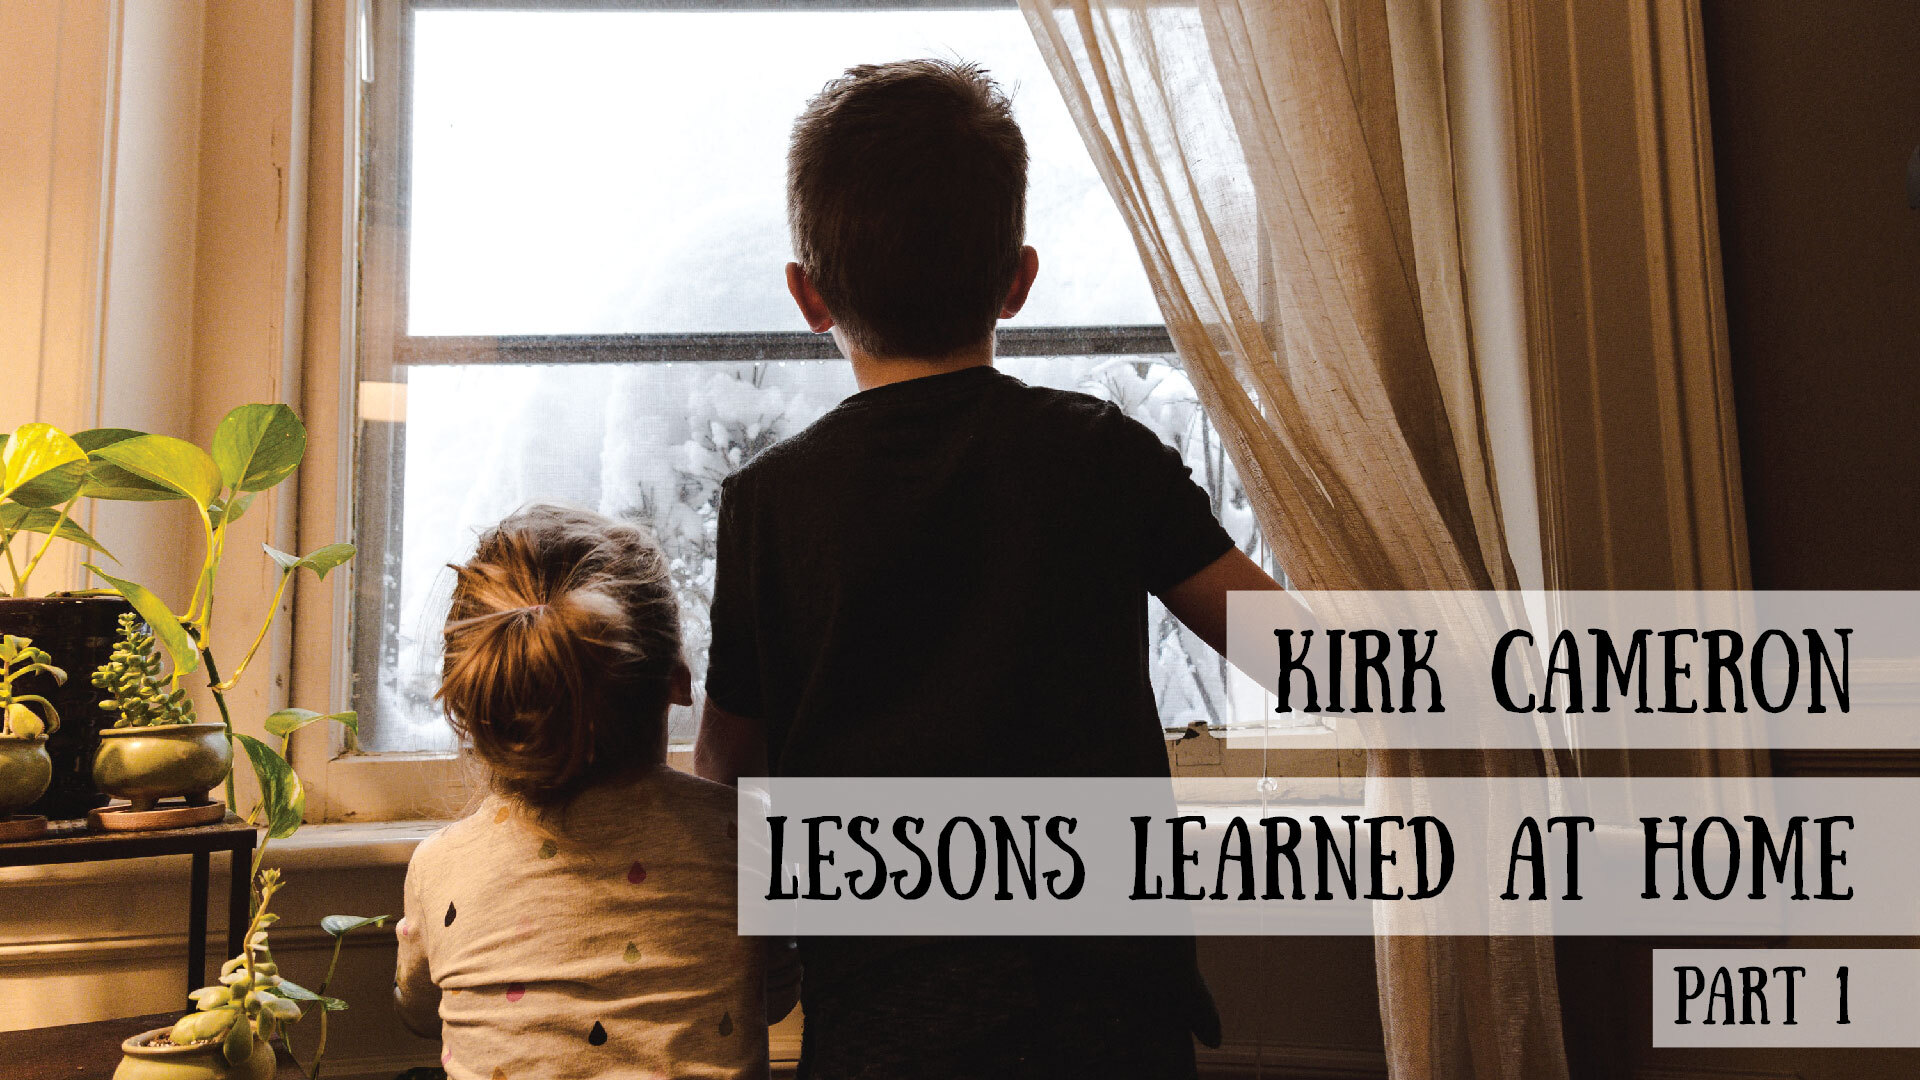 Kirk Cameron Interview - Lessons Learned at Home, Family and Marriage, Part 1